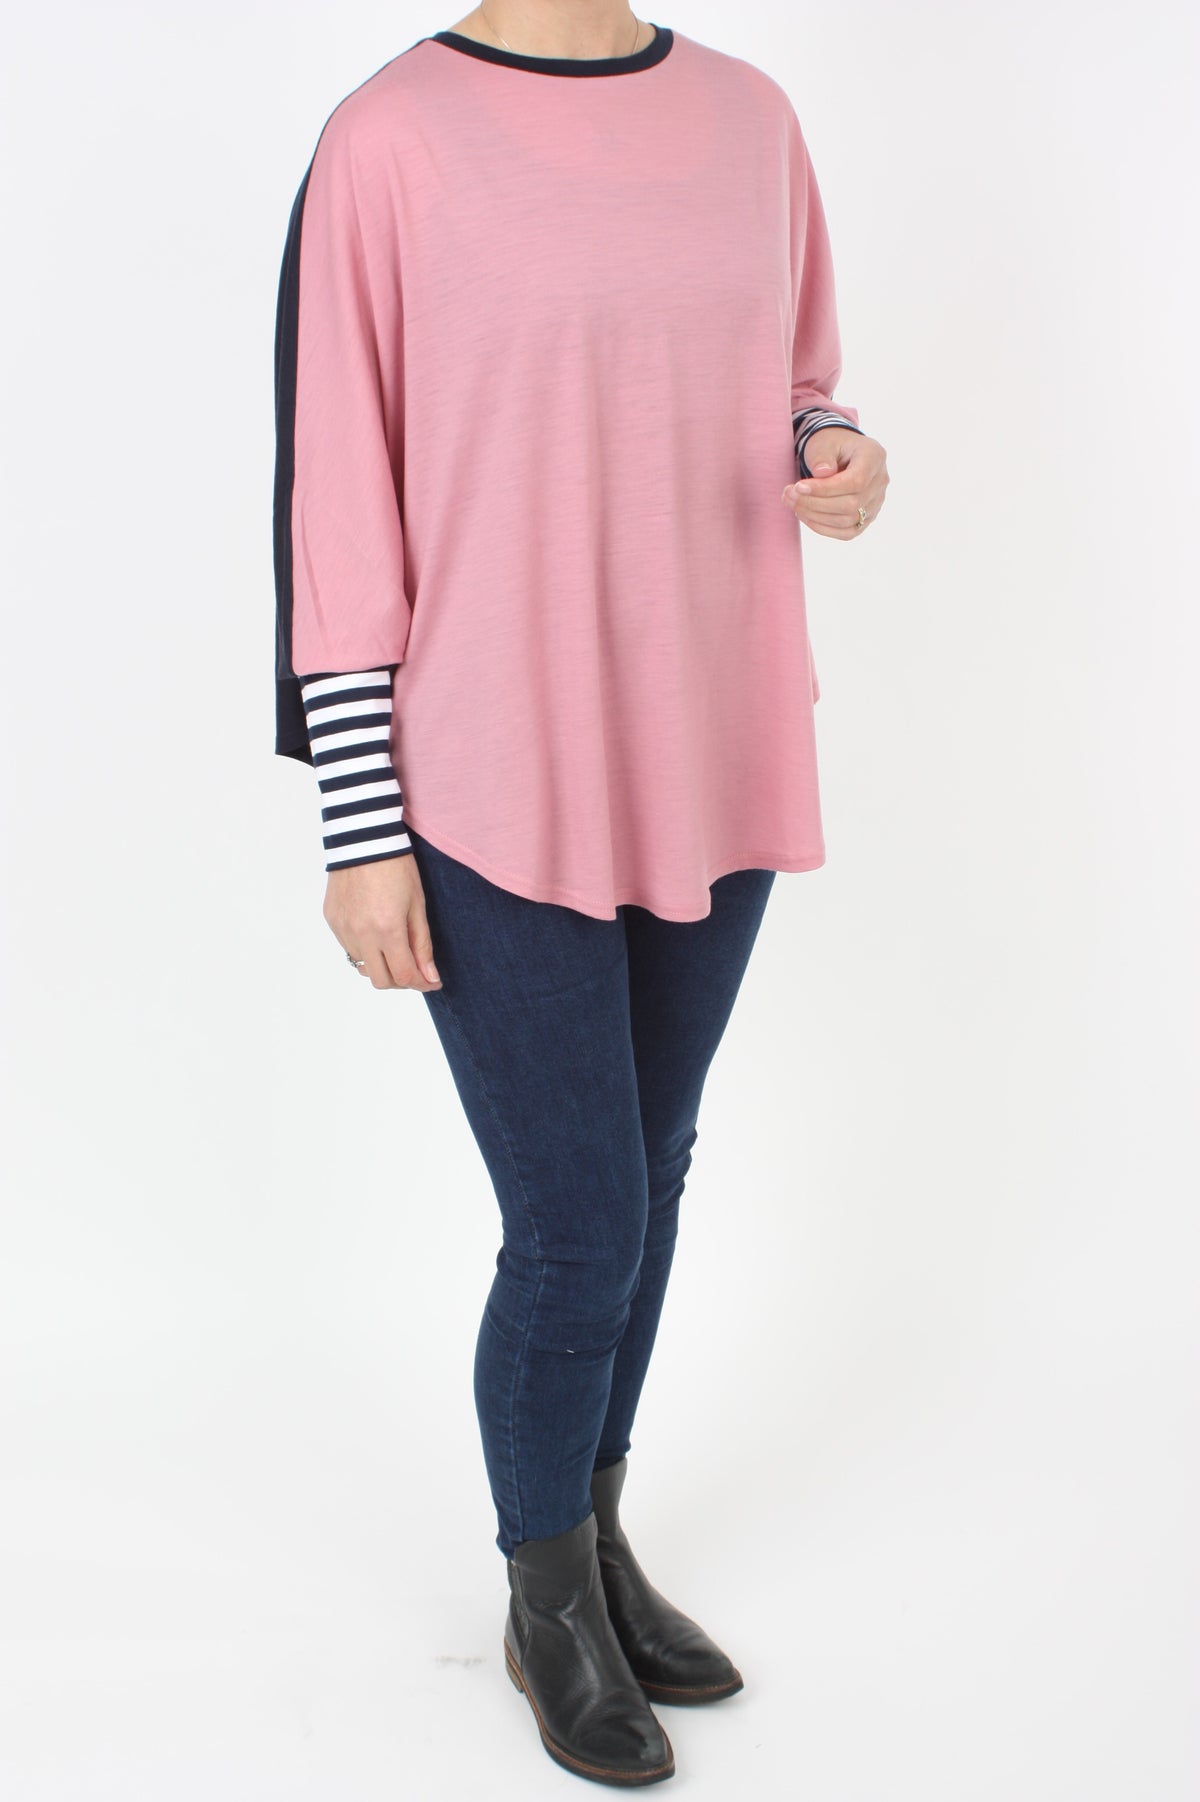 Poncho Merino Reversible - Navy and Pink with Navy and White stripe Cuff - Pre Order 2 - 3 Weeks